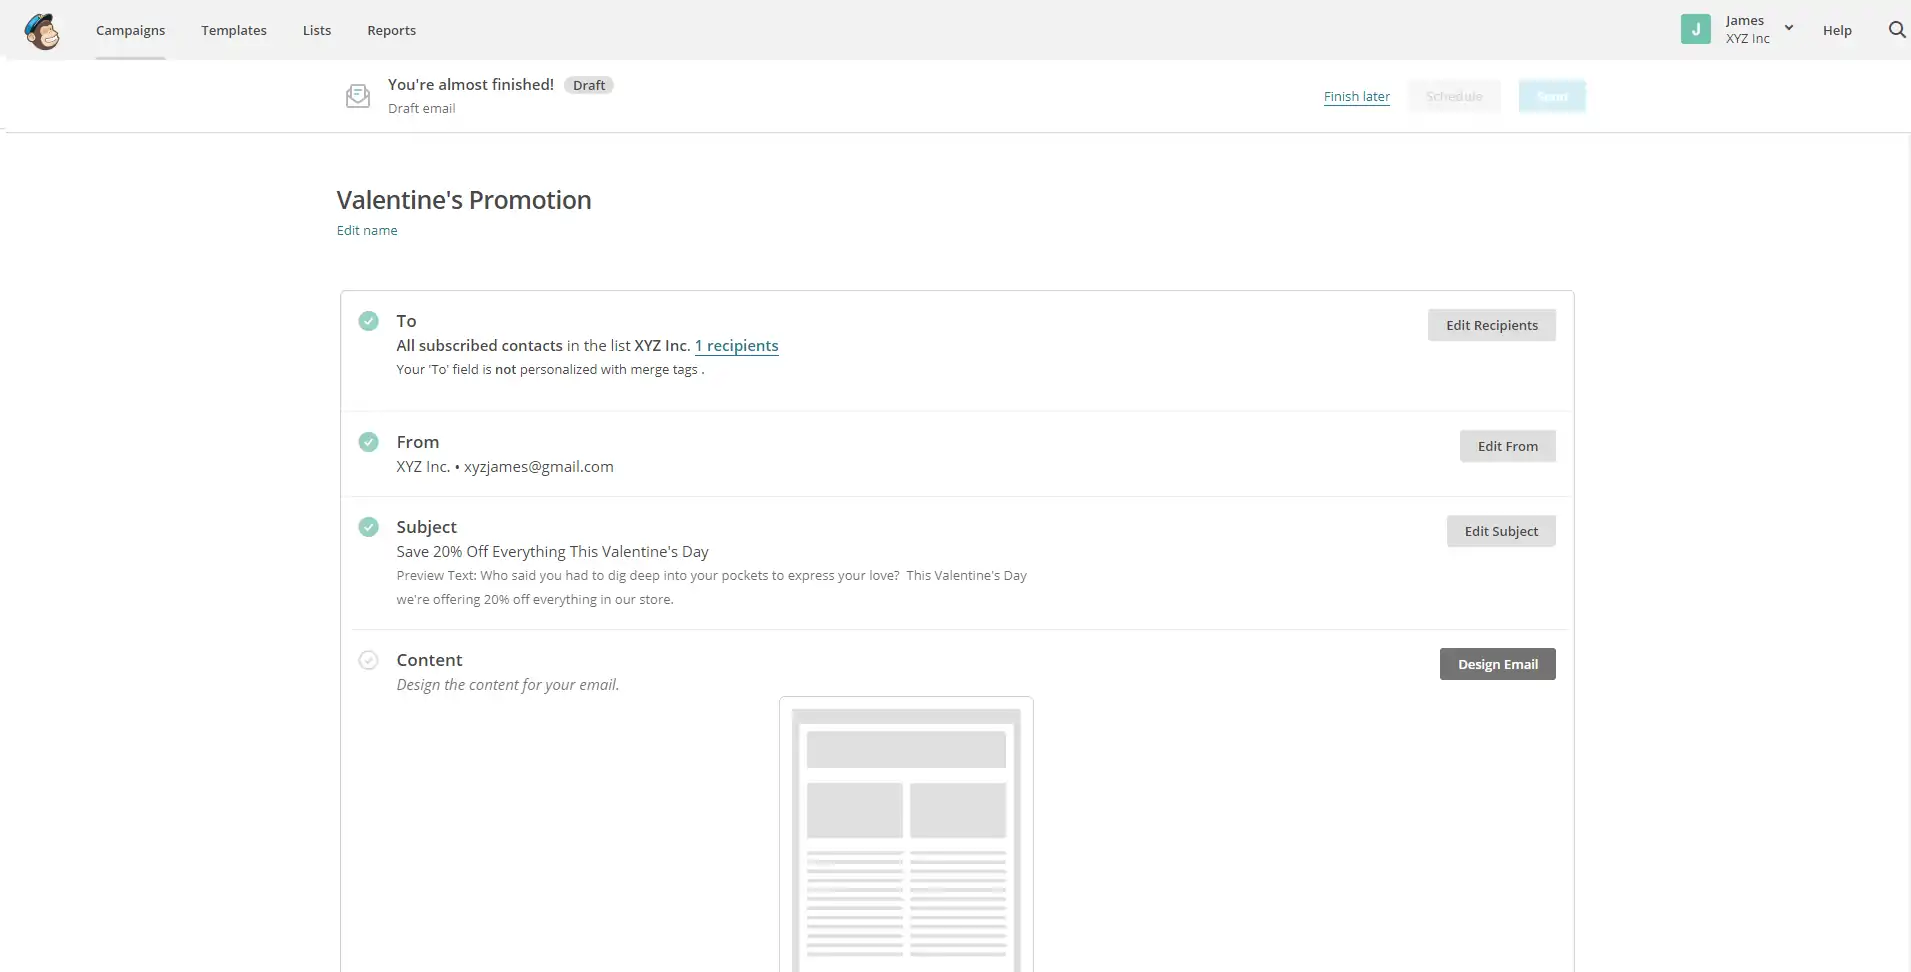 Getting Started With Mailchimp - Understanding and Using Mailchimp Email Marketing Automation 10